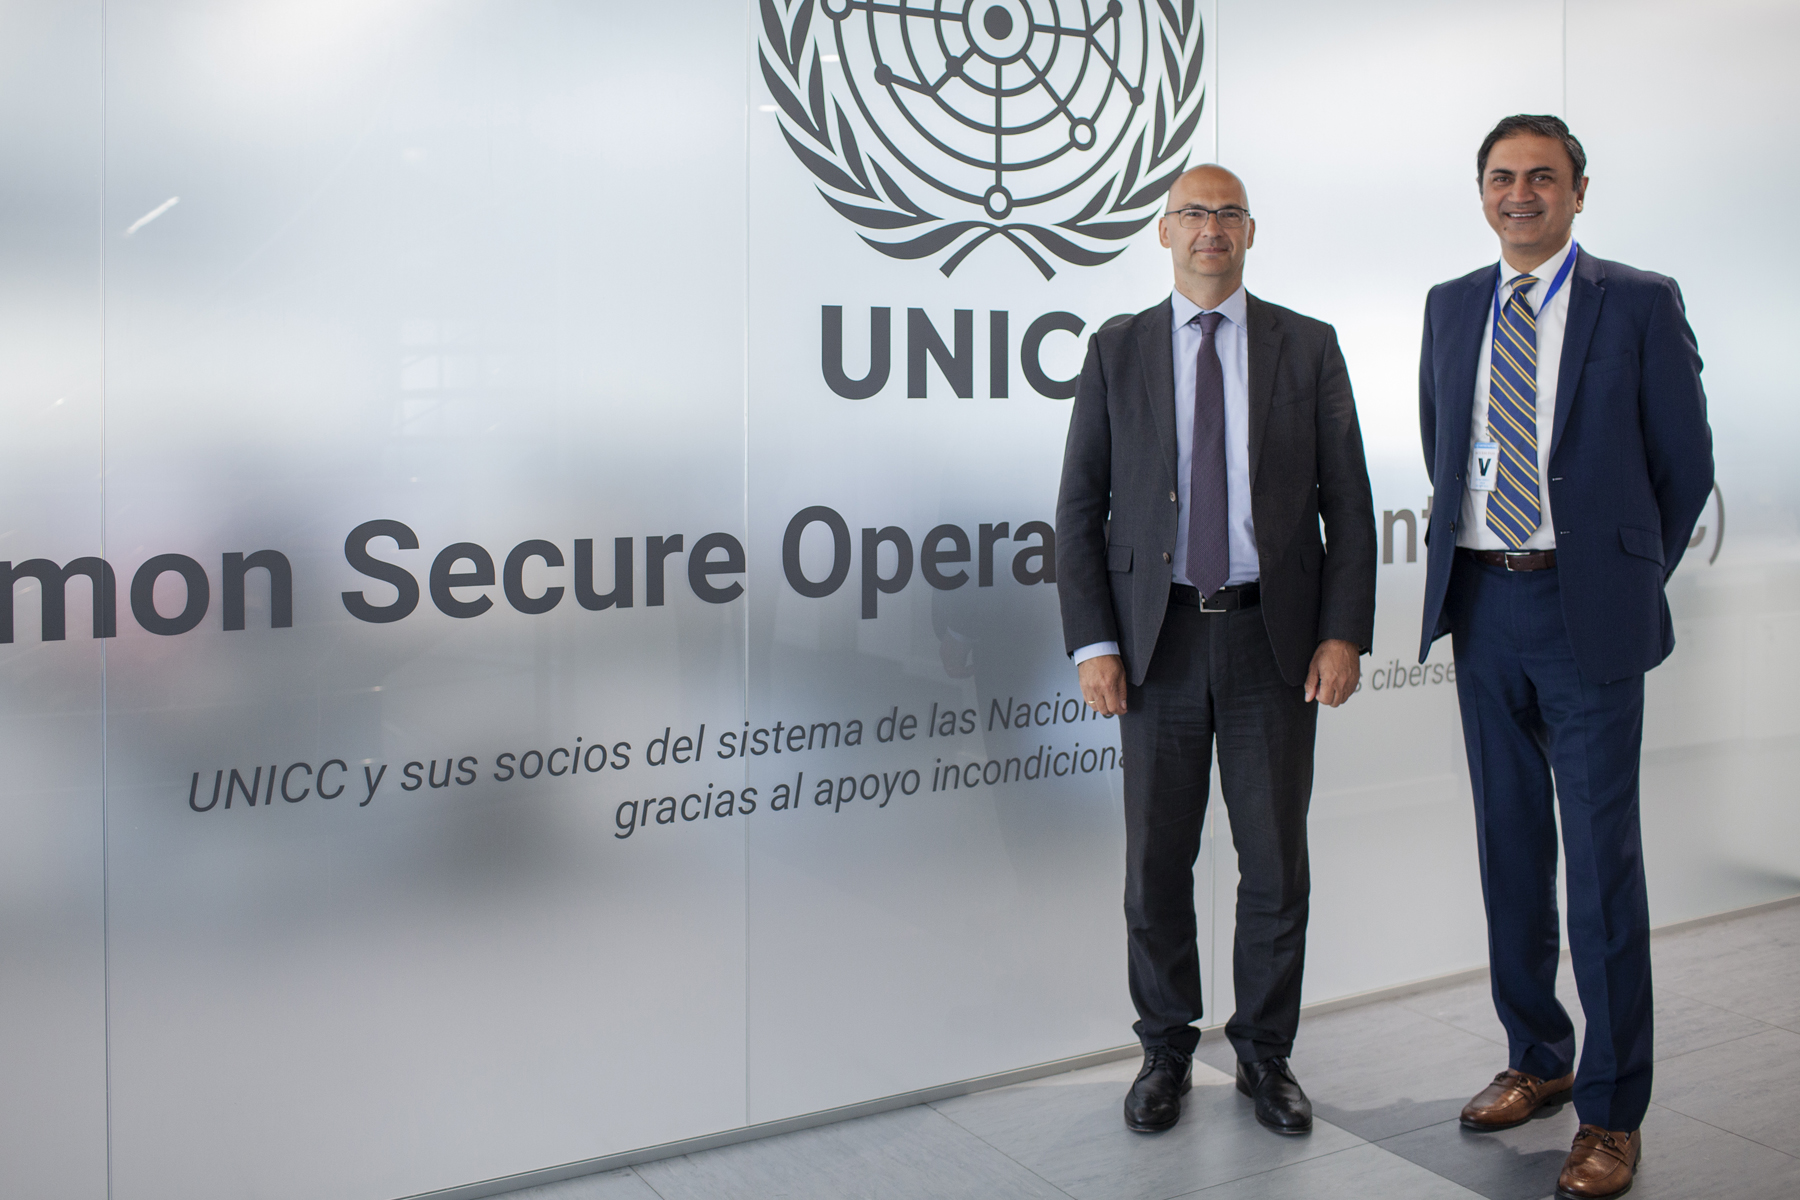 UNICC and FAO Strengthen Partnership through UNICC’s Cybersecurity Centre of Excellence